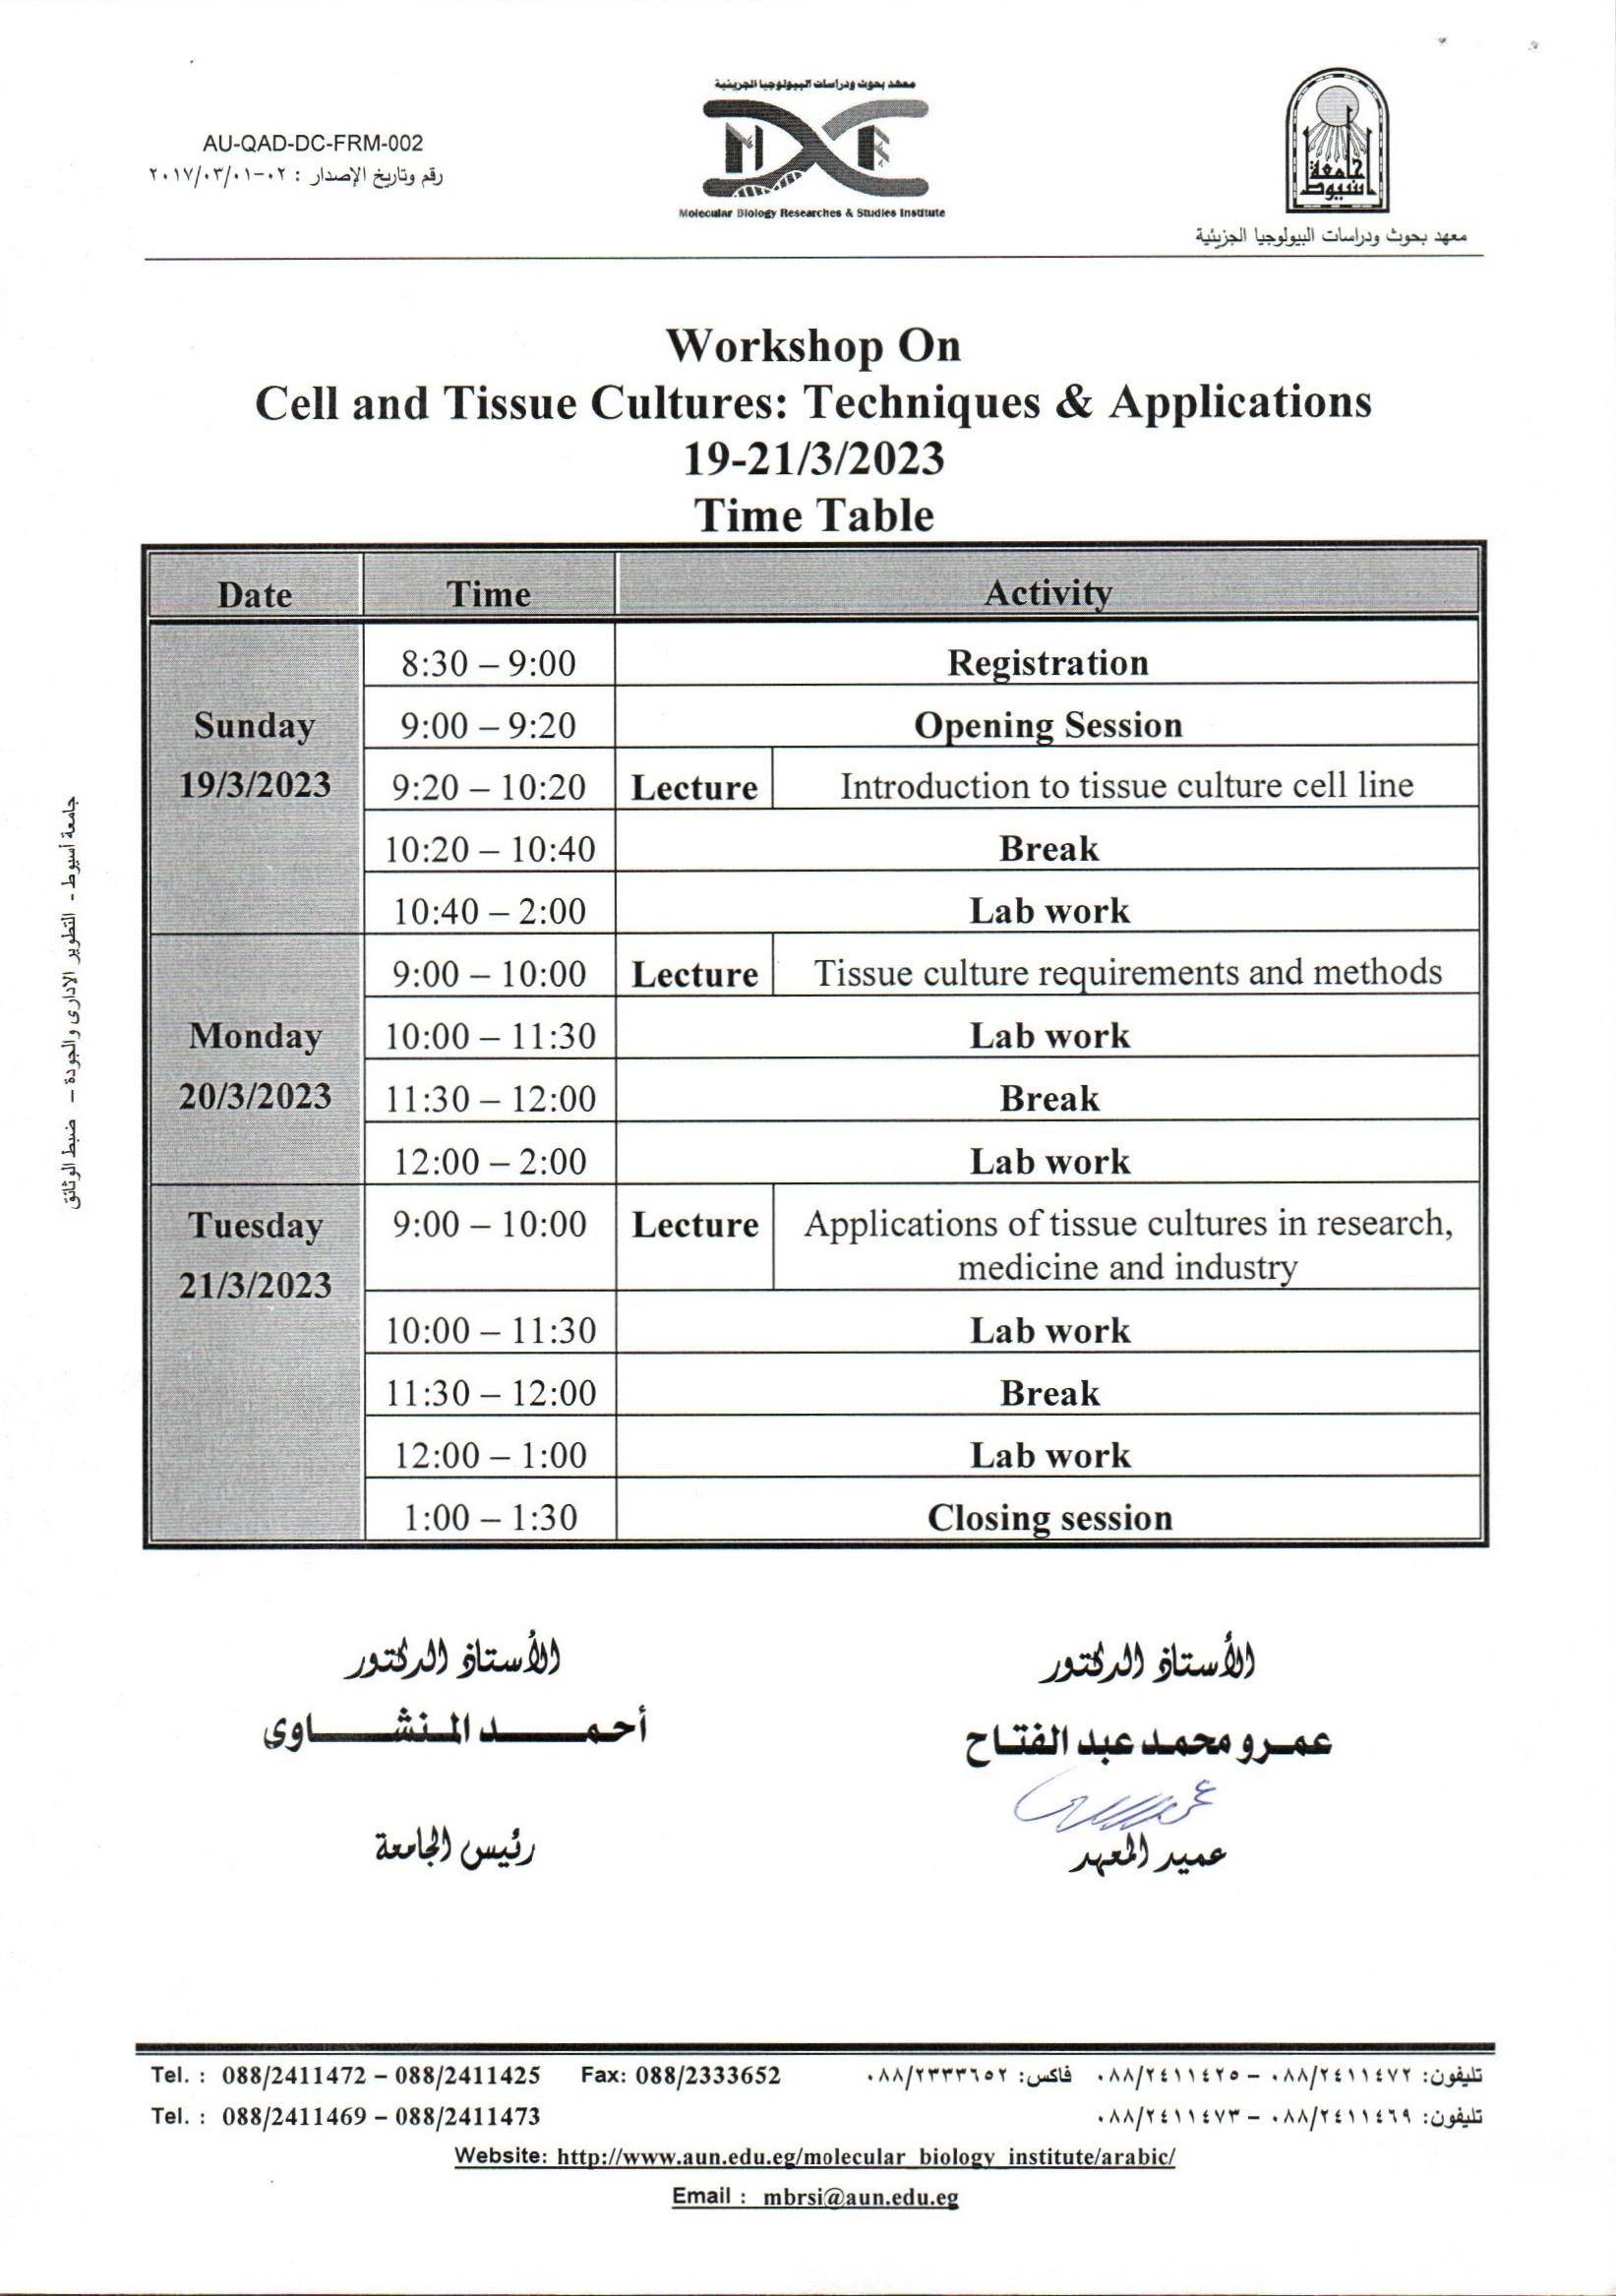 time Table